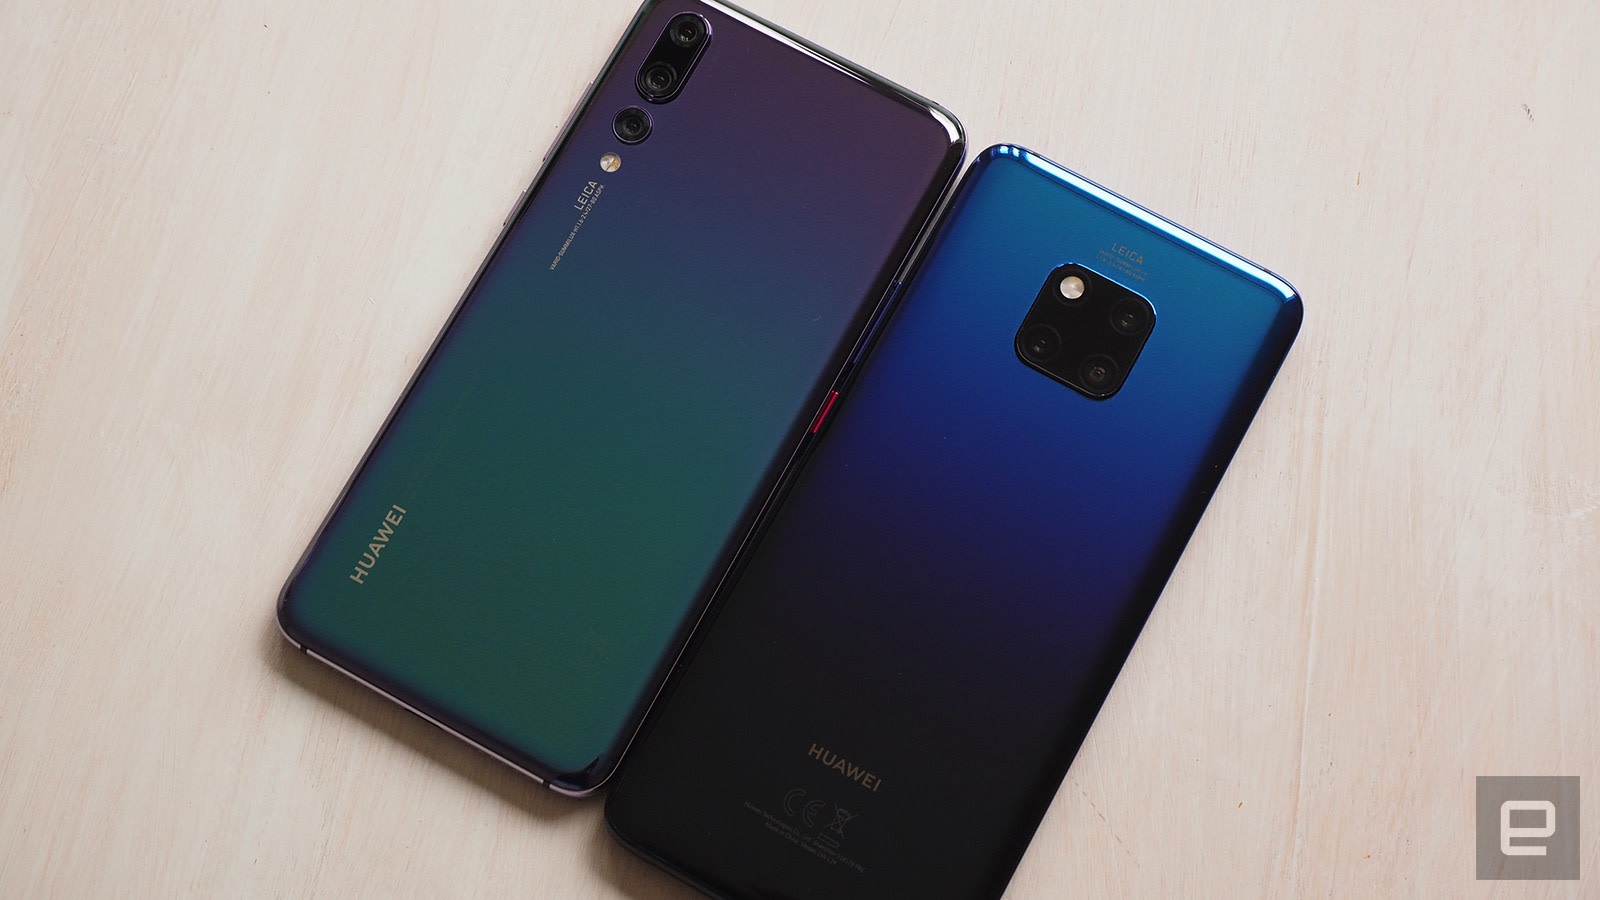 Okkernoot melodie Penetratie Huawei Mate 20 Pro review: Surprisingly, almost perfect | Engadget